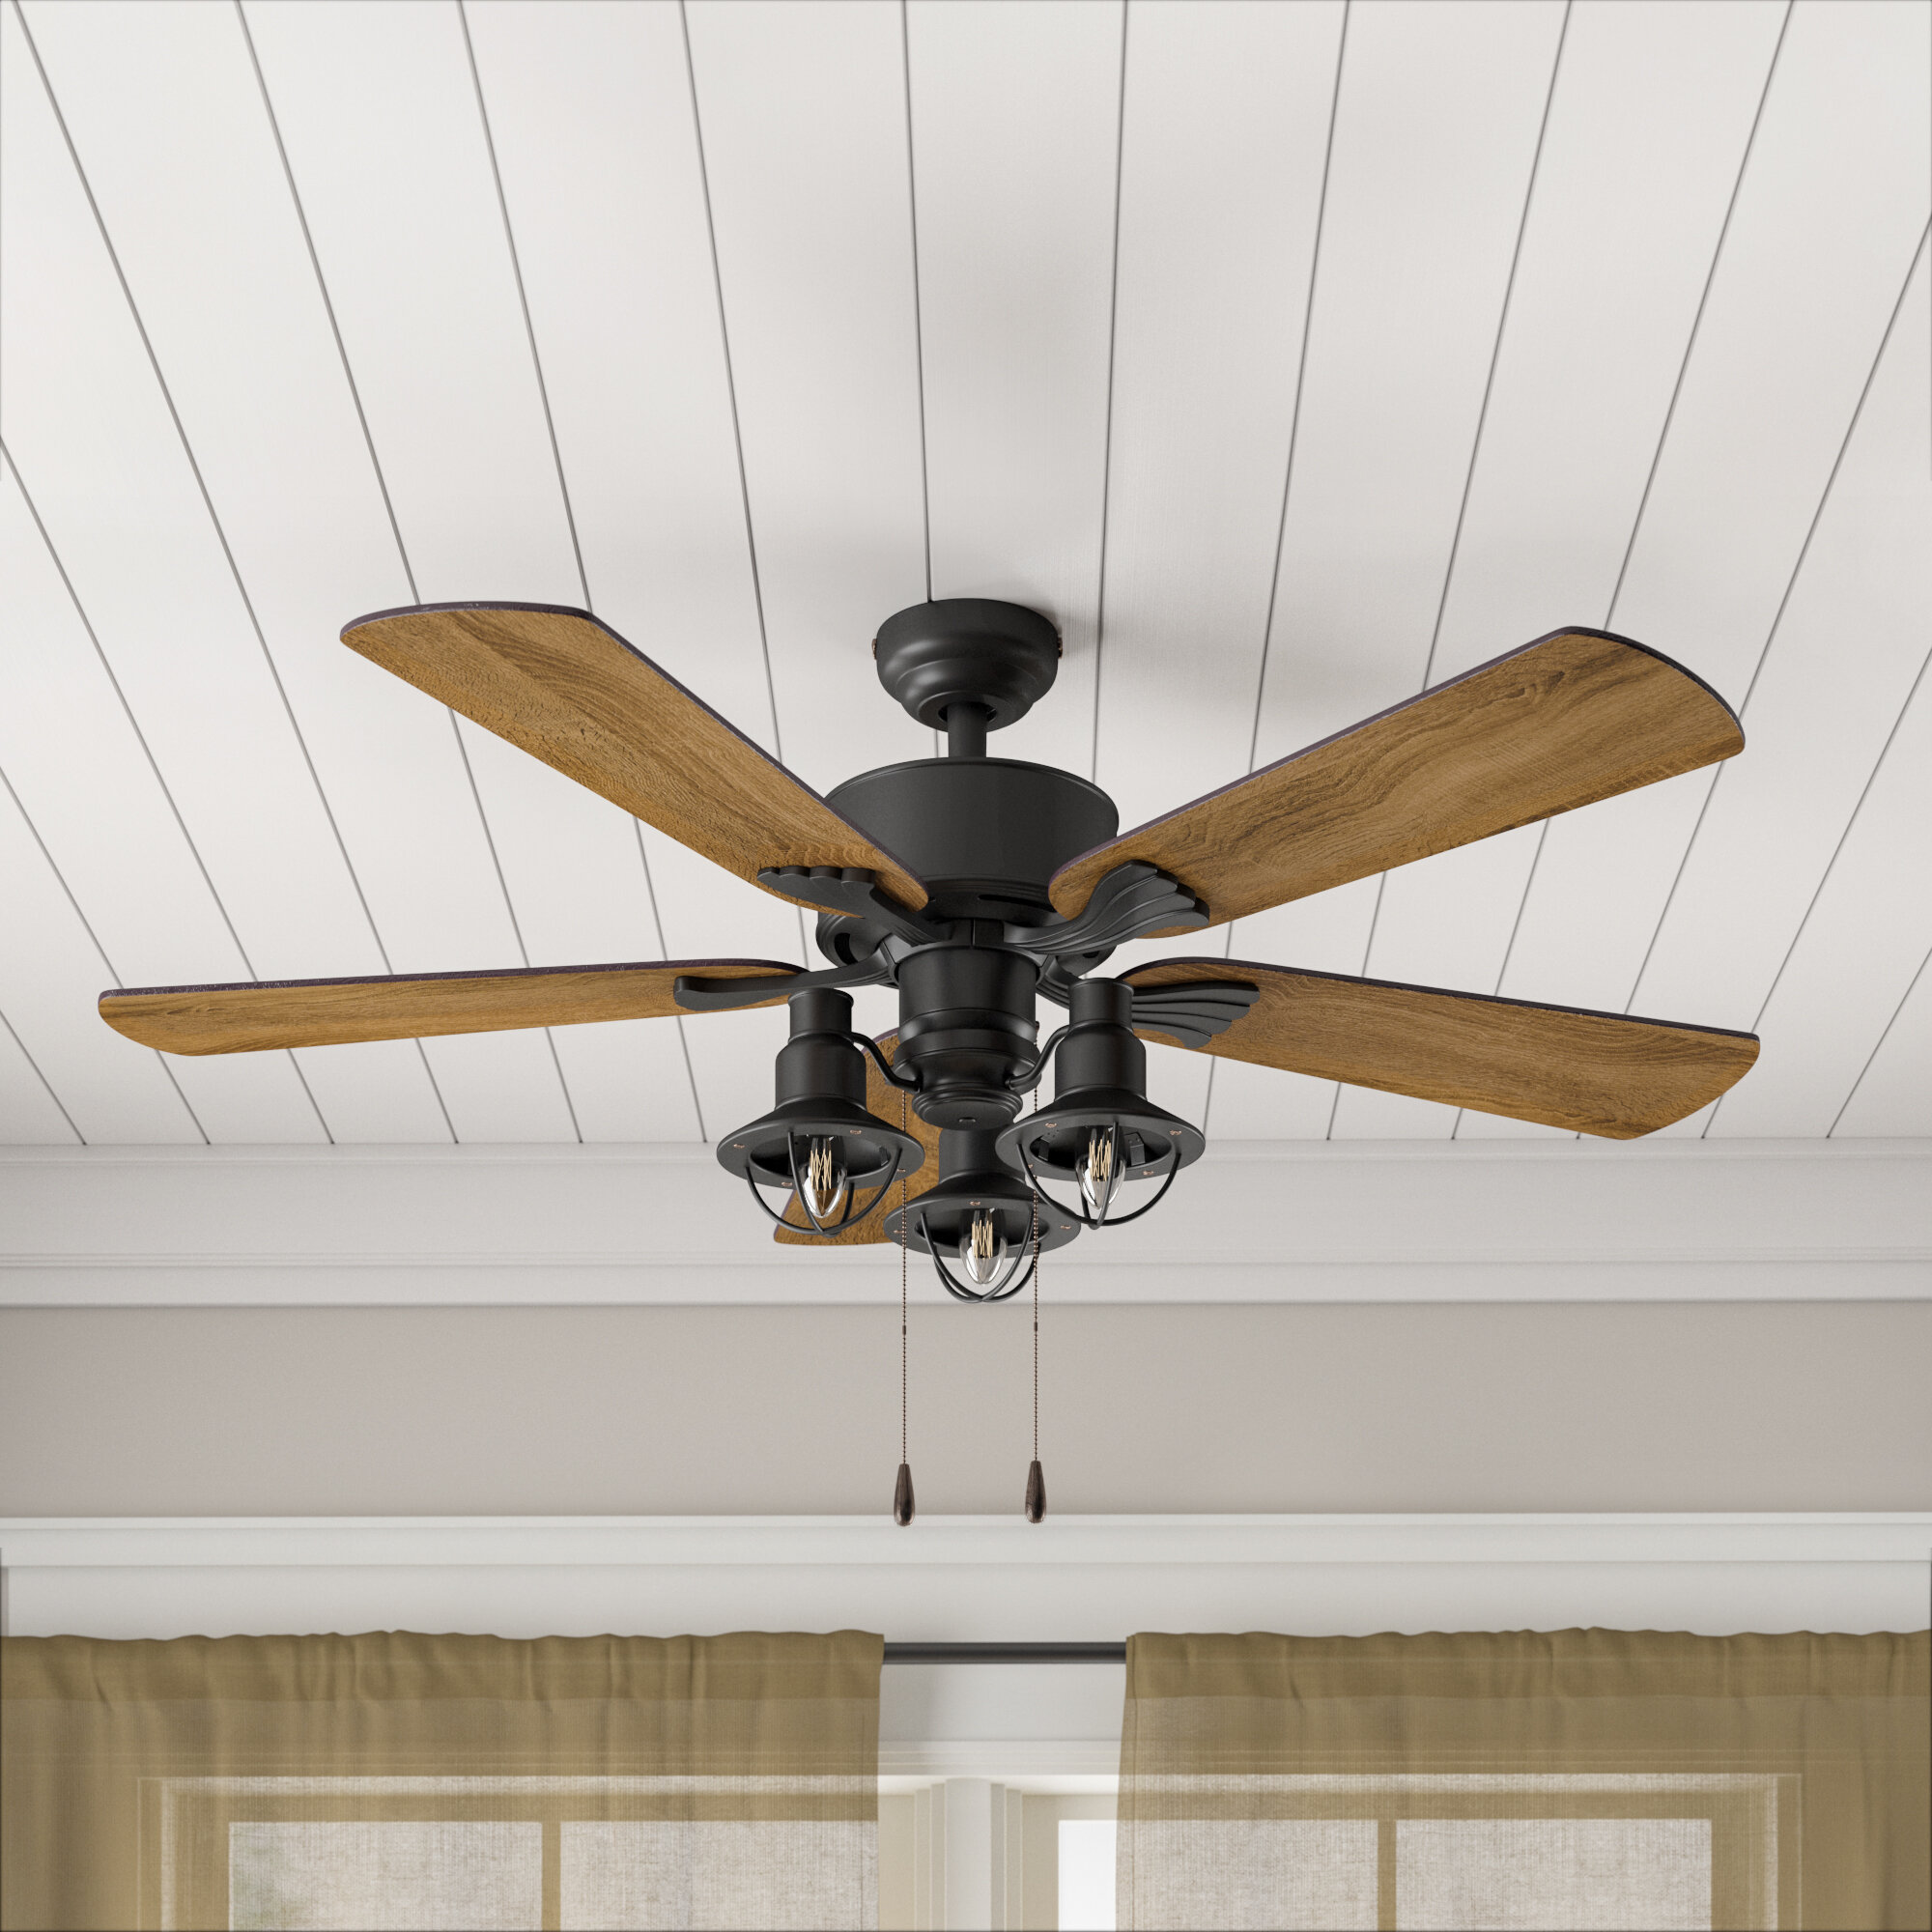 Controlled Fans On 1839 Vaulted Ceilings With Surface Mount